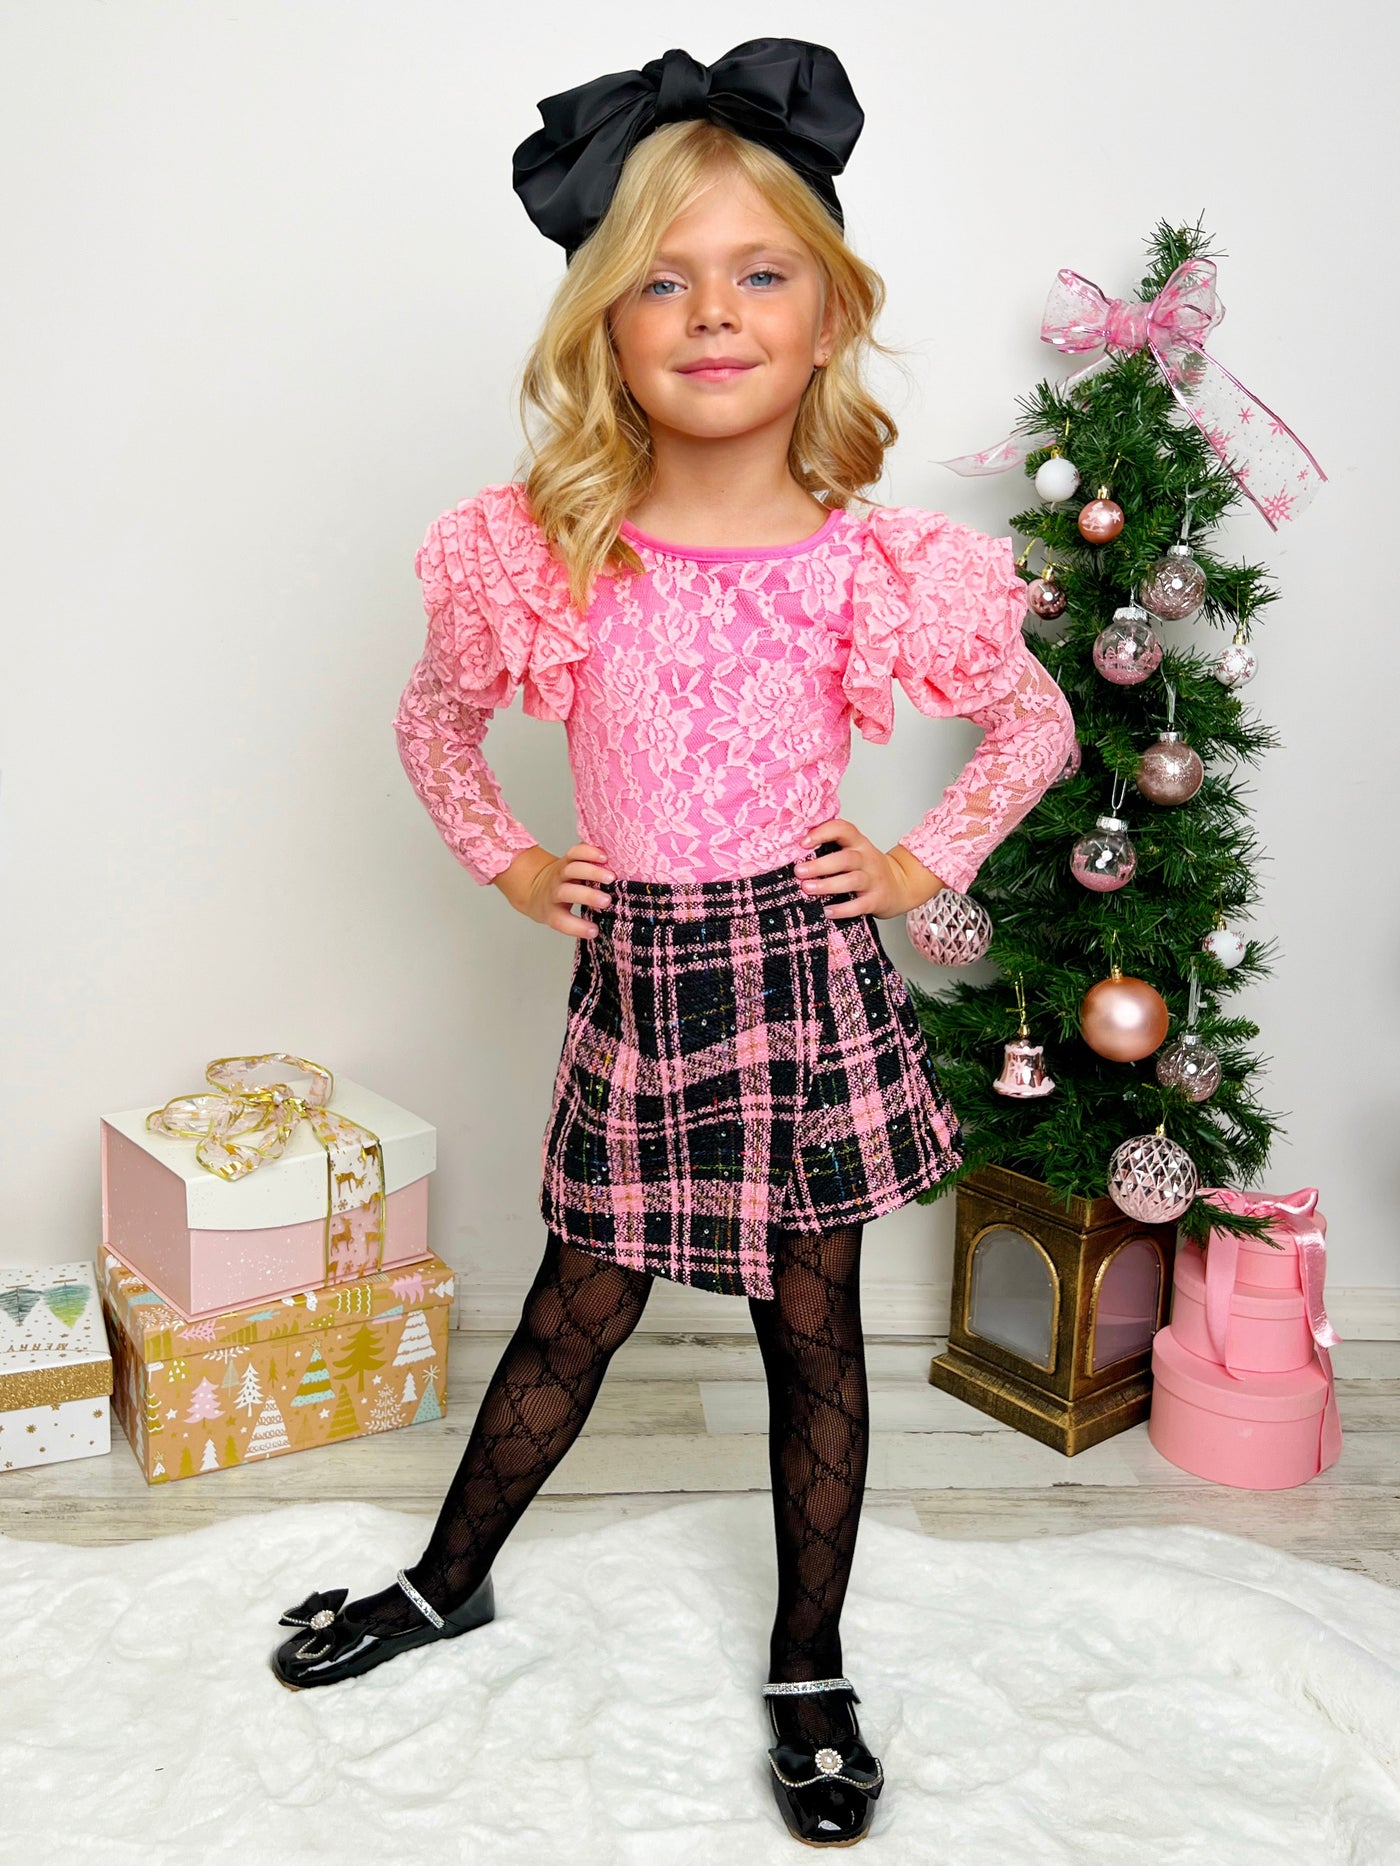 Mia Belle Girls Pink Lace Top & Plaid Skort Set | Cute Winter Outfits